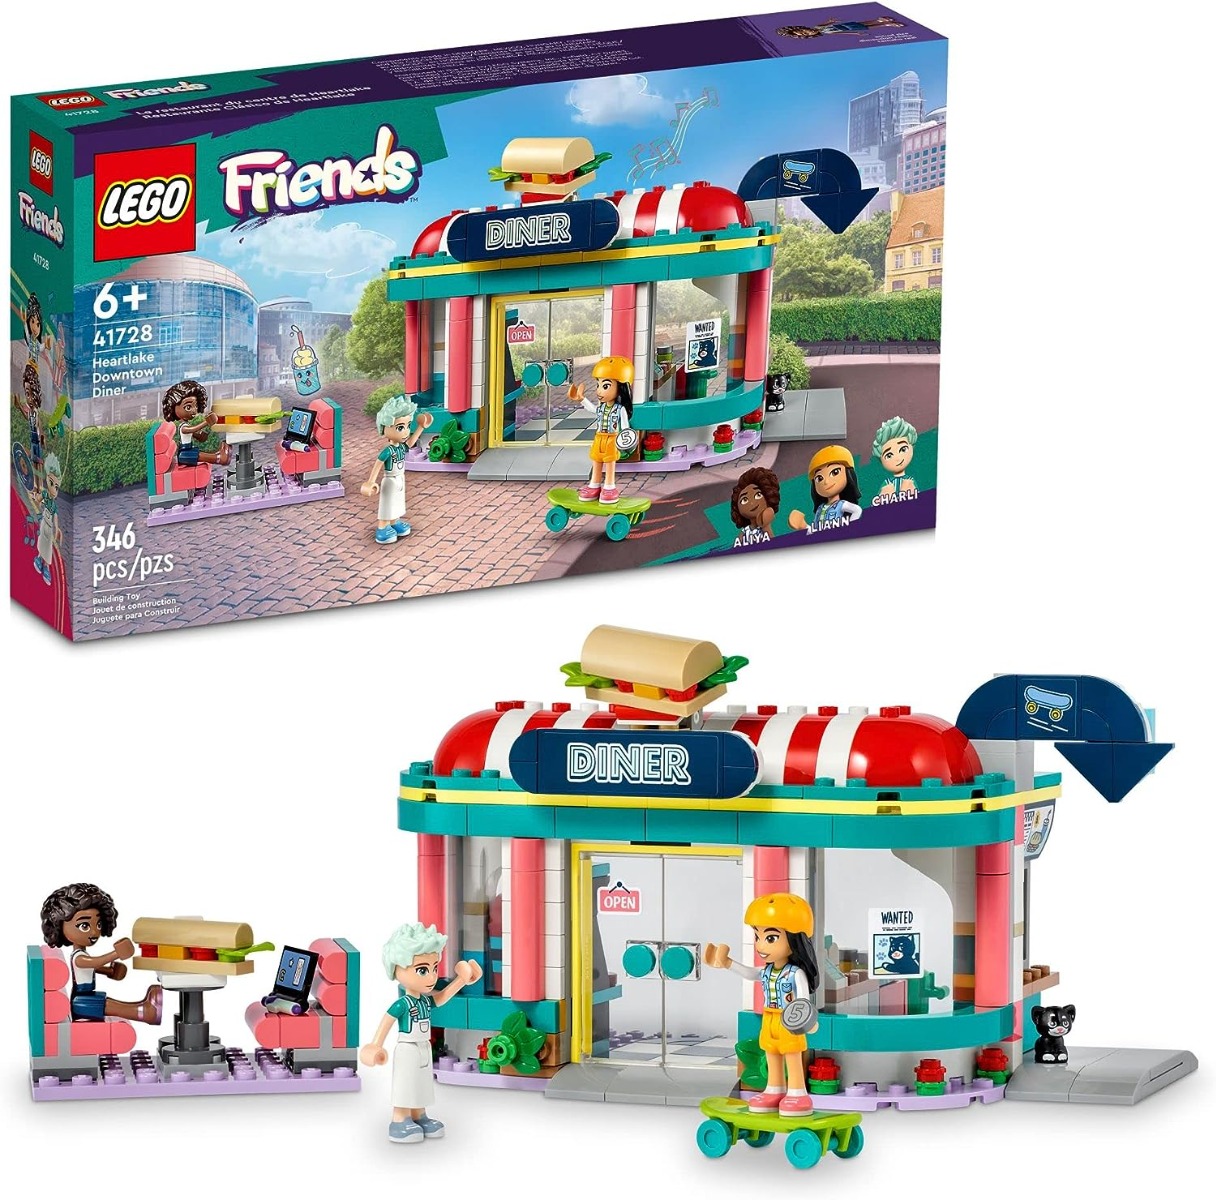 LEGO 41728 Friends - Heartlake Downtown Diner Building Toy (346 pcs)